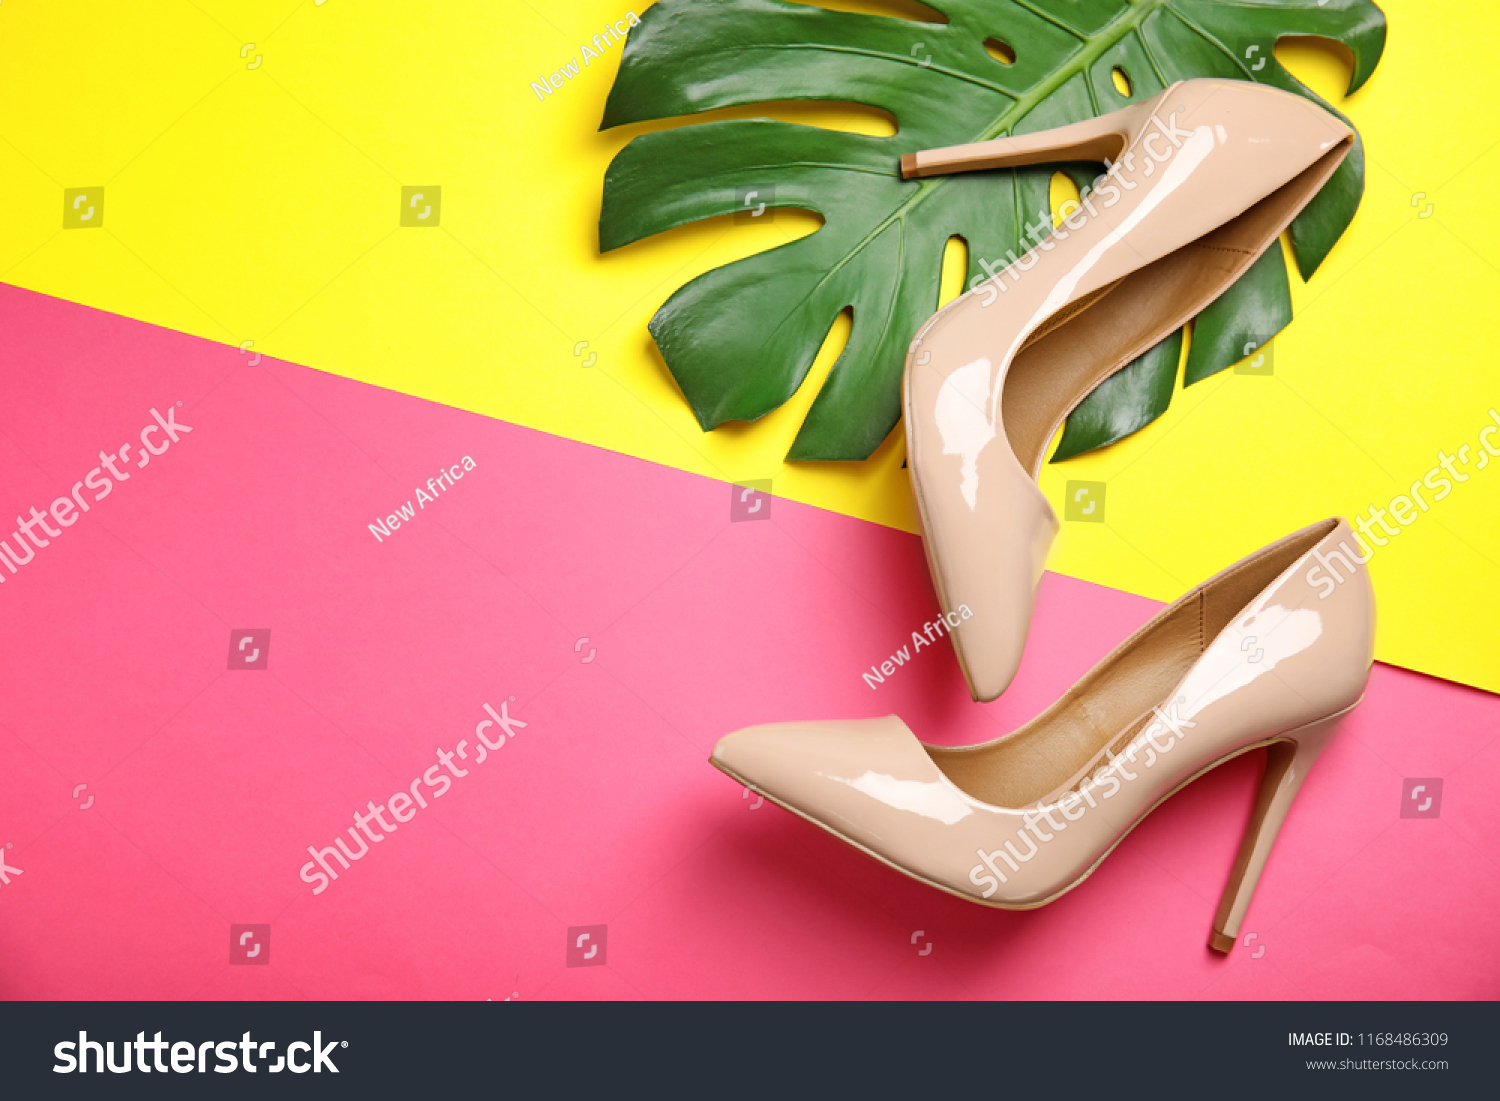 Pair of beautiful shoes with monstera leaf and space for text on color background, top view #1168486309